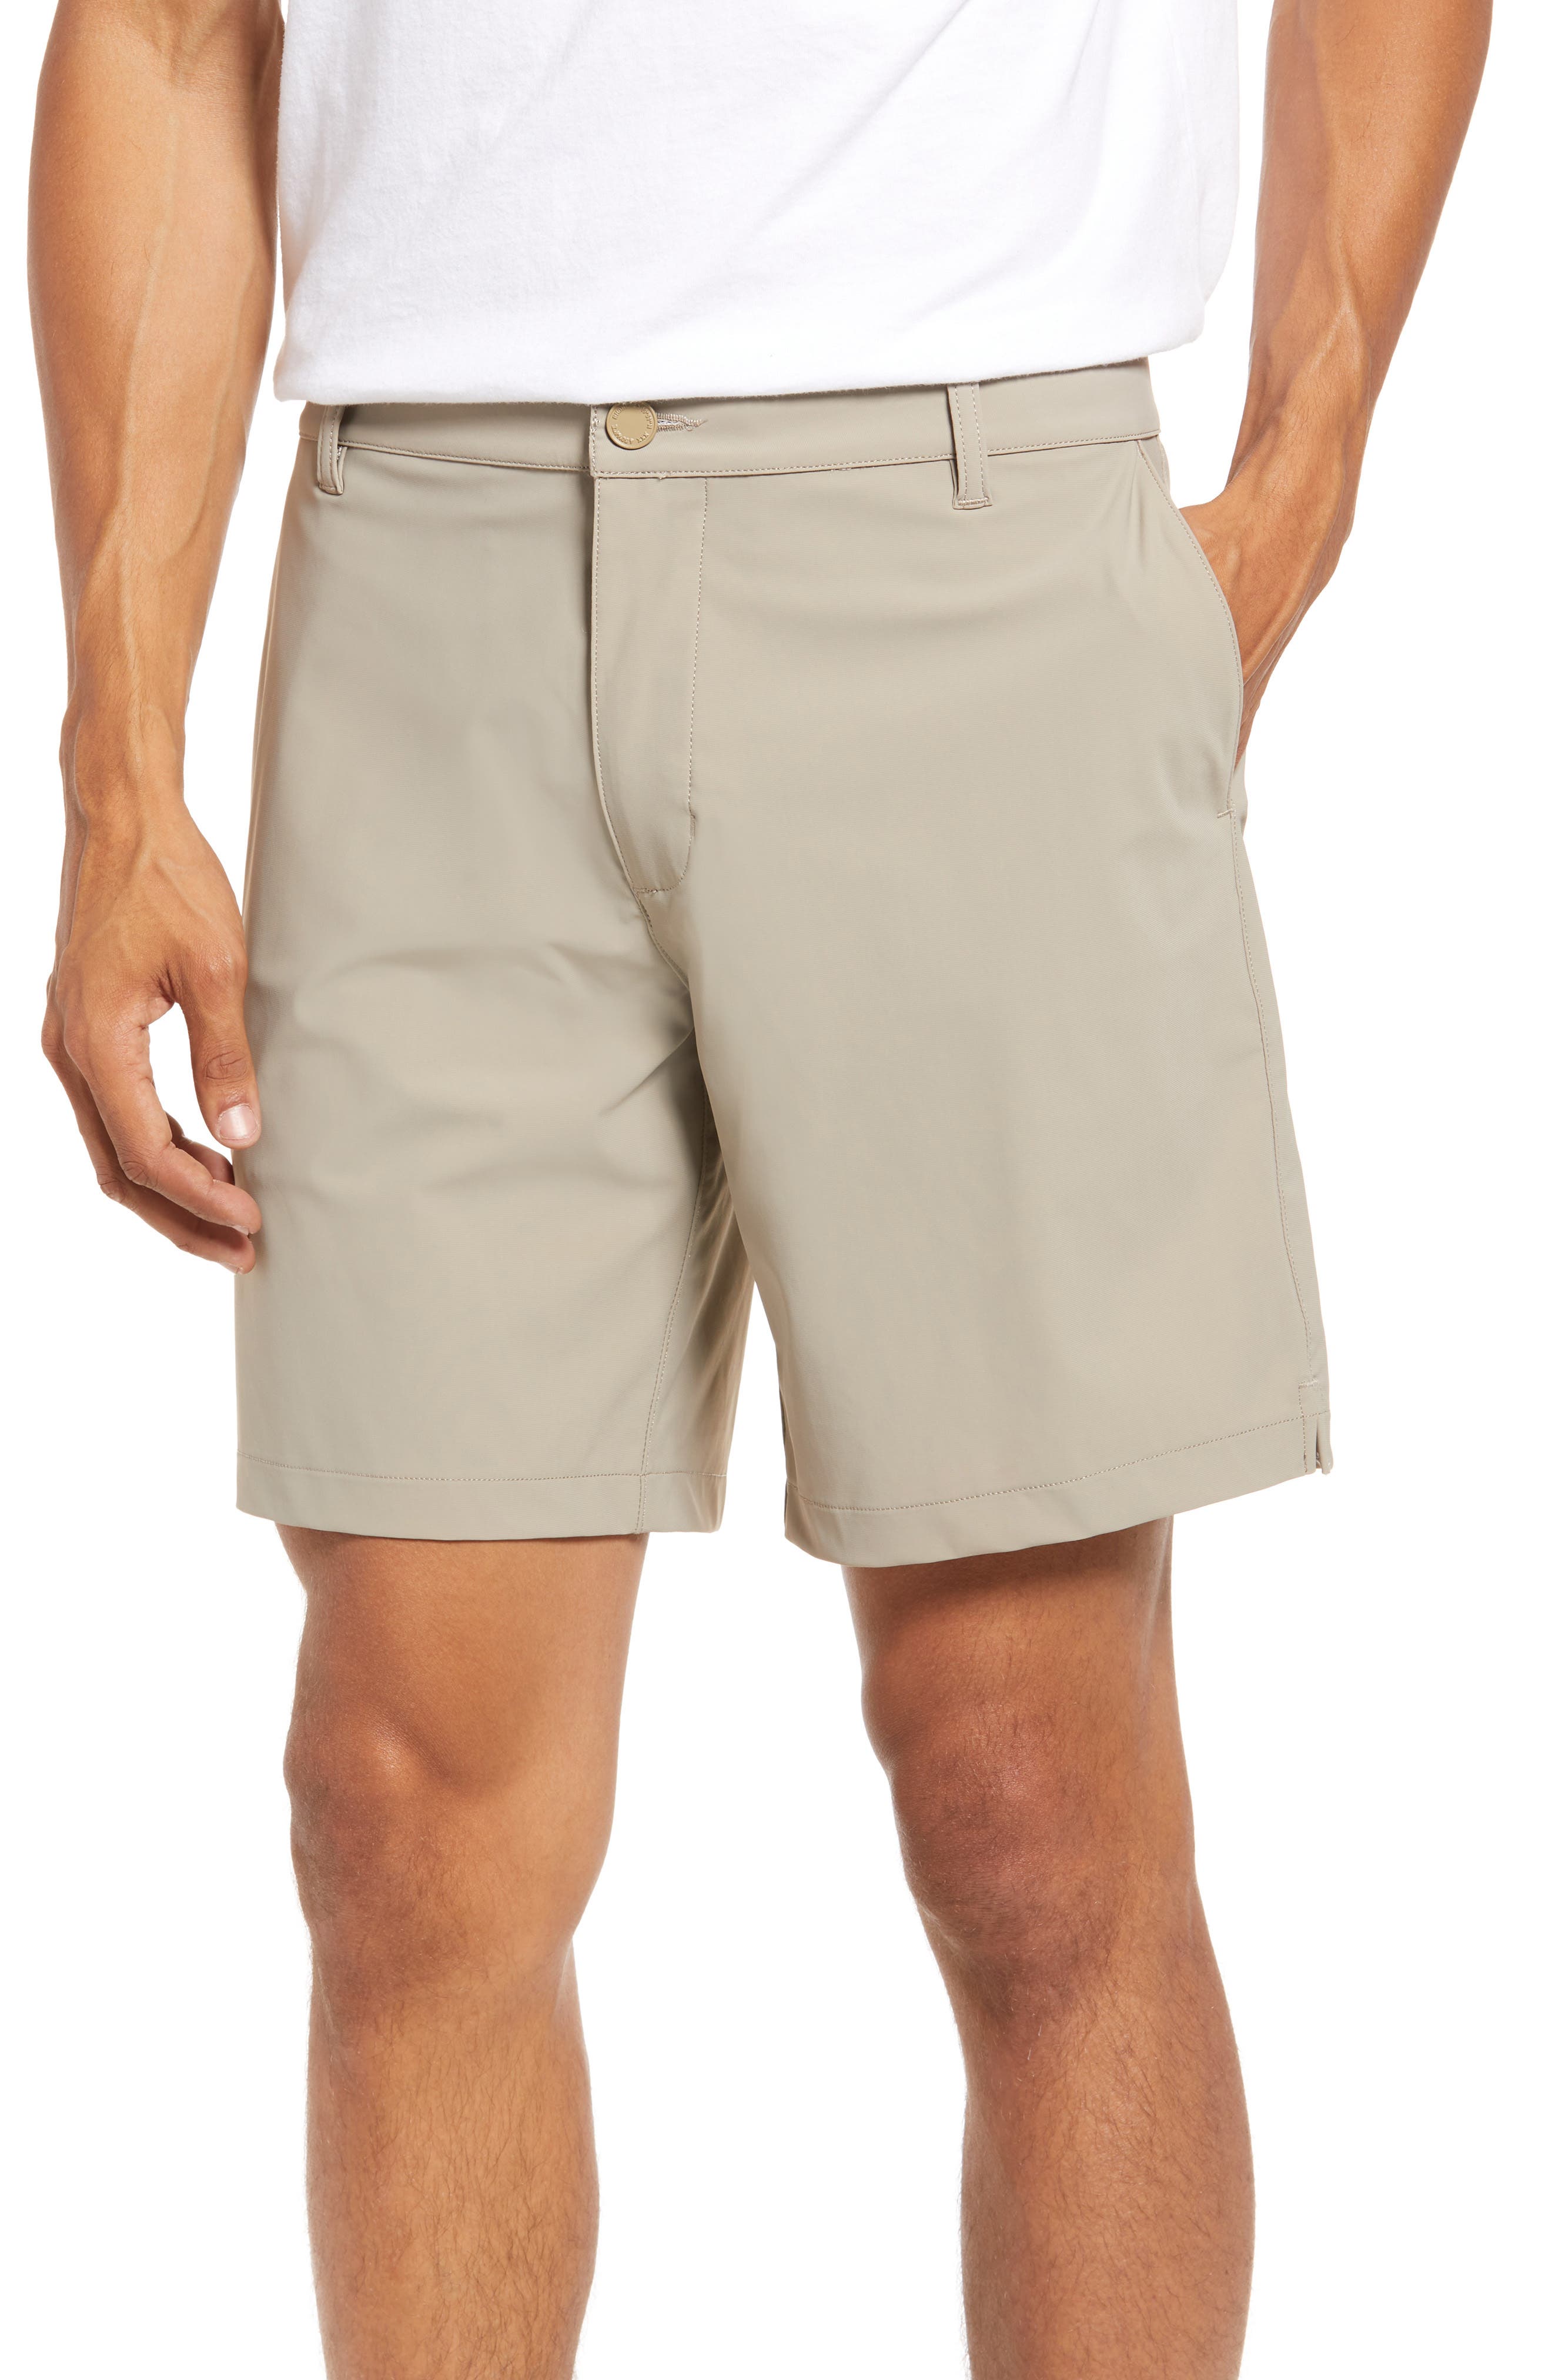 NEW MENS CLUB ROOM FLAT FRONT OXFORD CASUAL COTTON SHORTS 